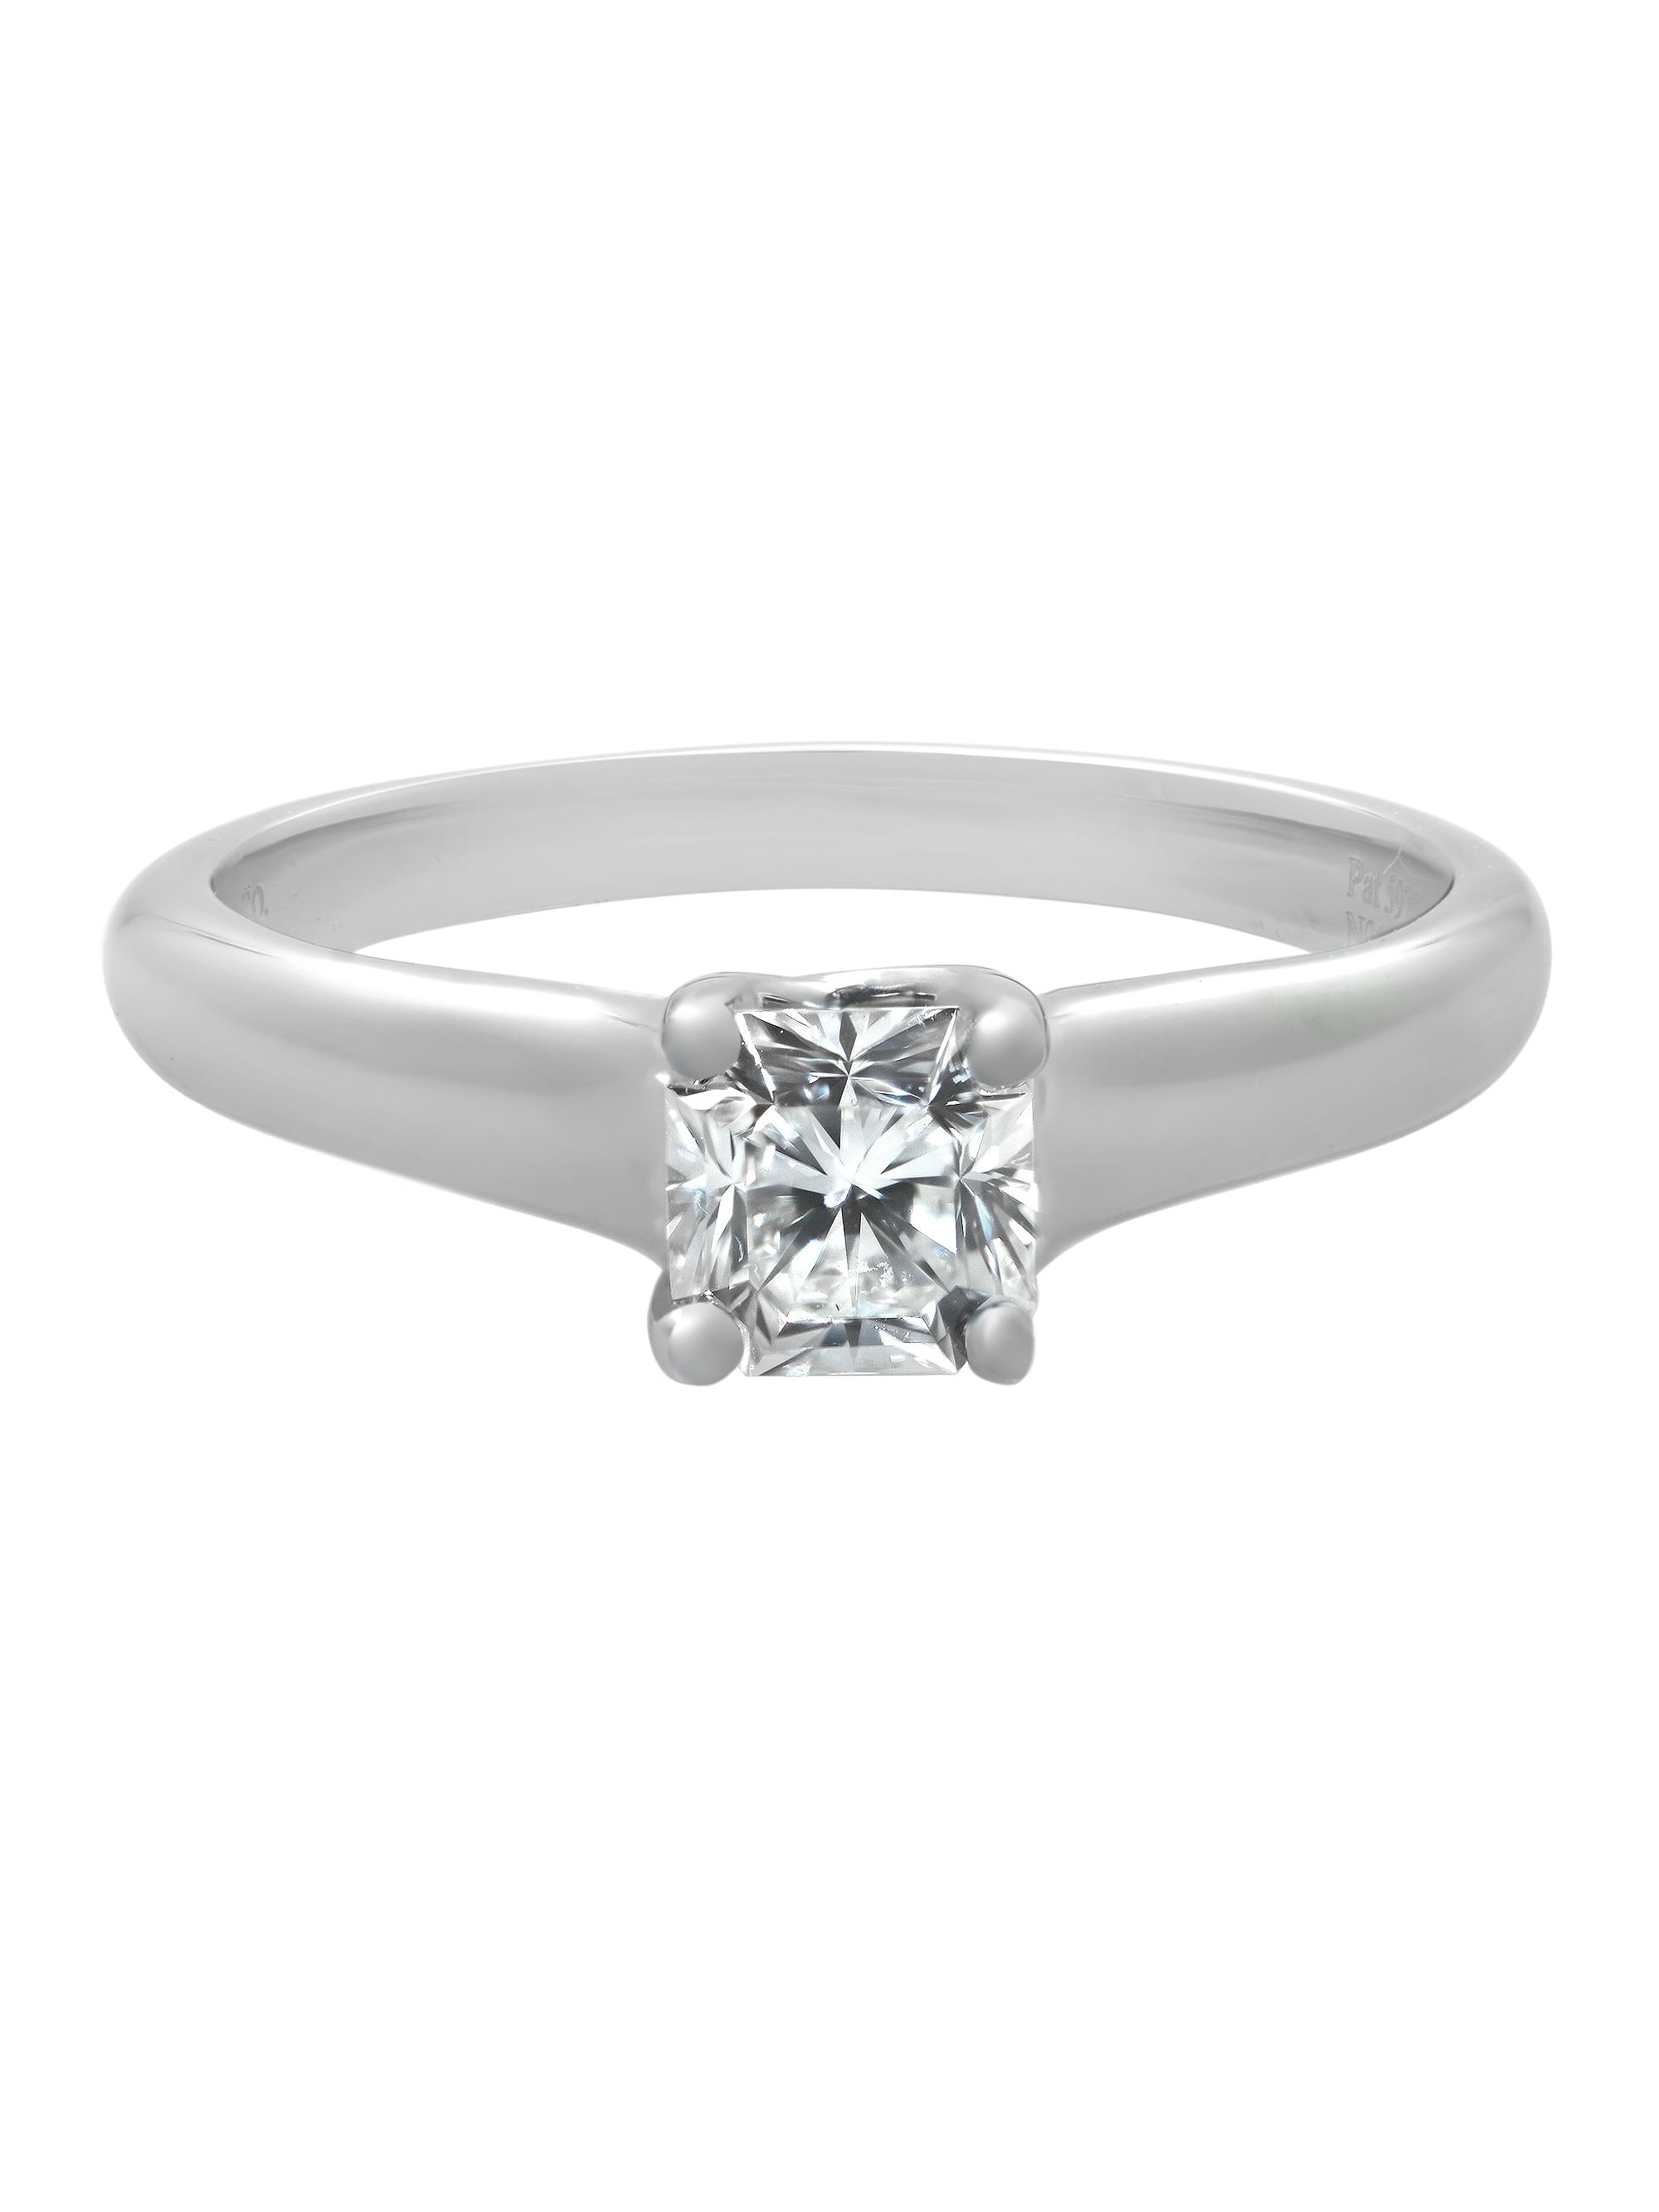 Tiffany & Co Platinum Lucida Solitaire Diamond Engagement Ring 0.41cttw Size 6 Pre-Owned